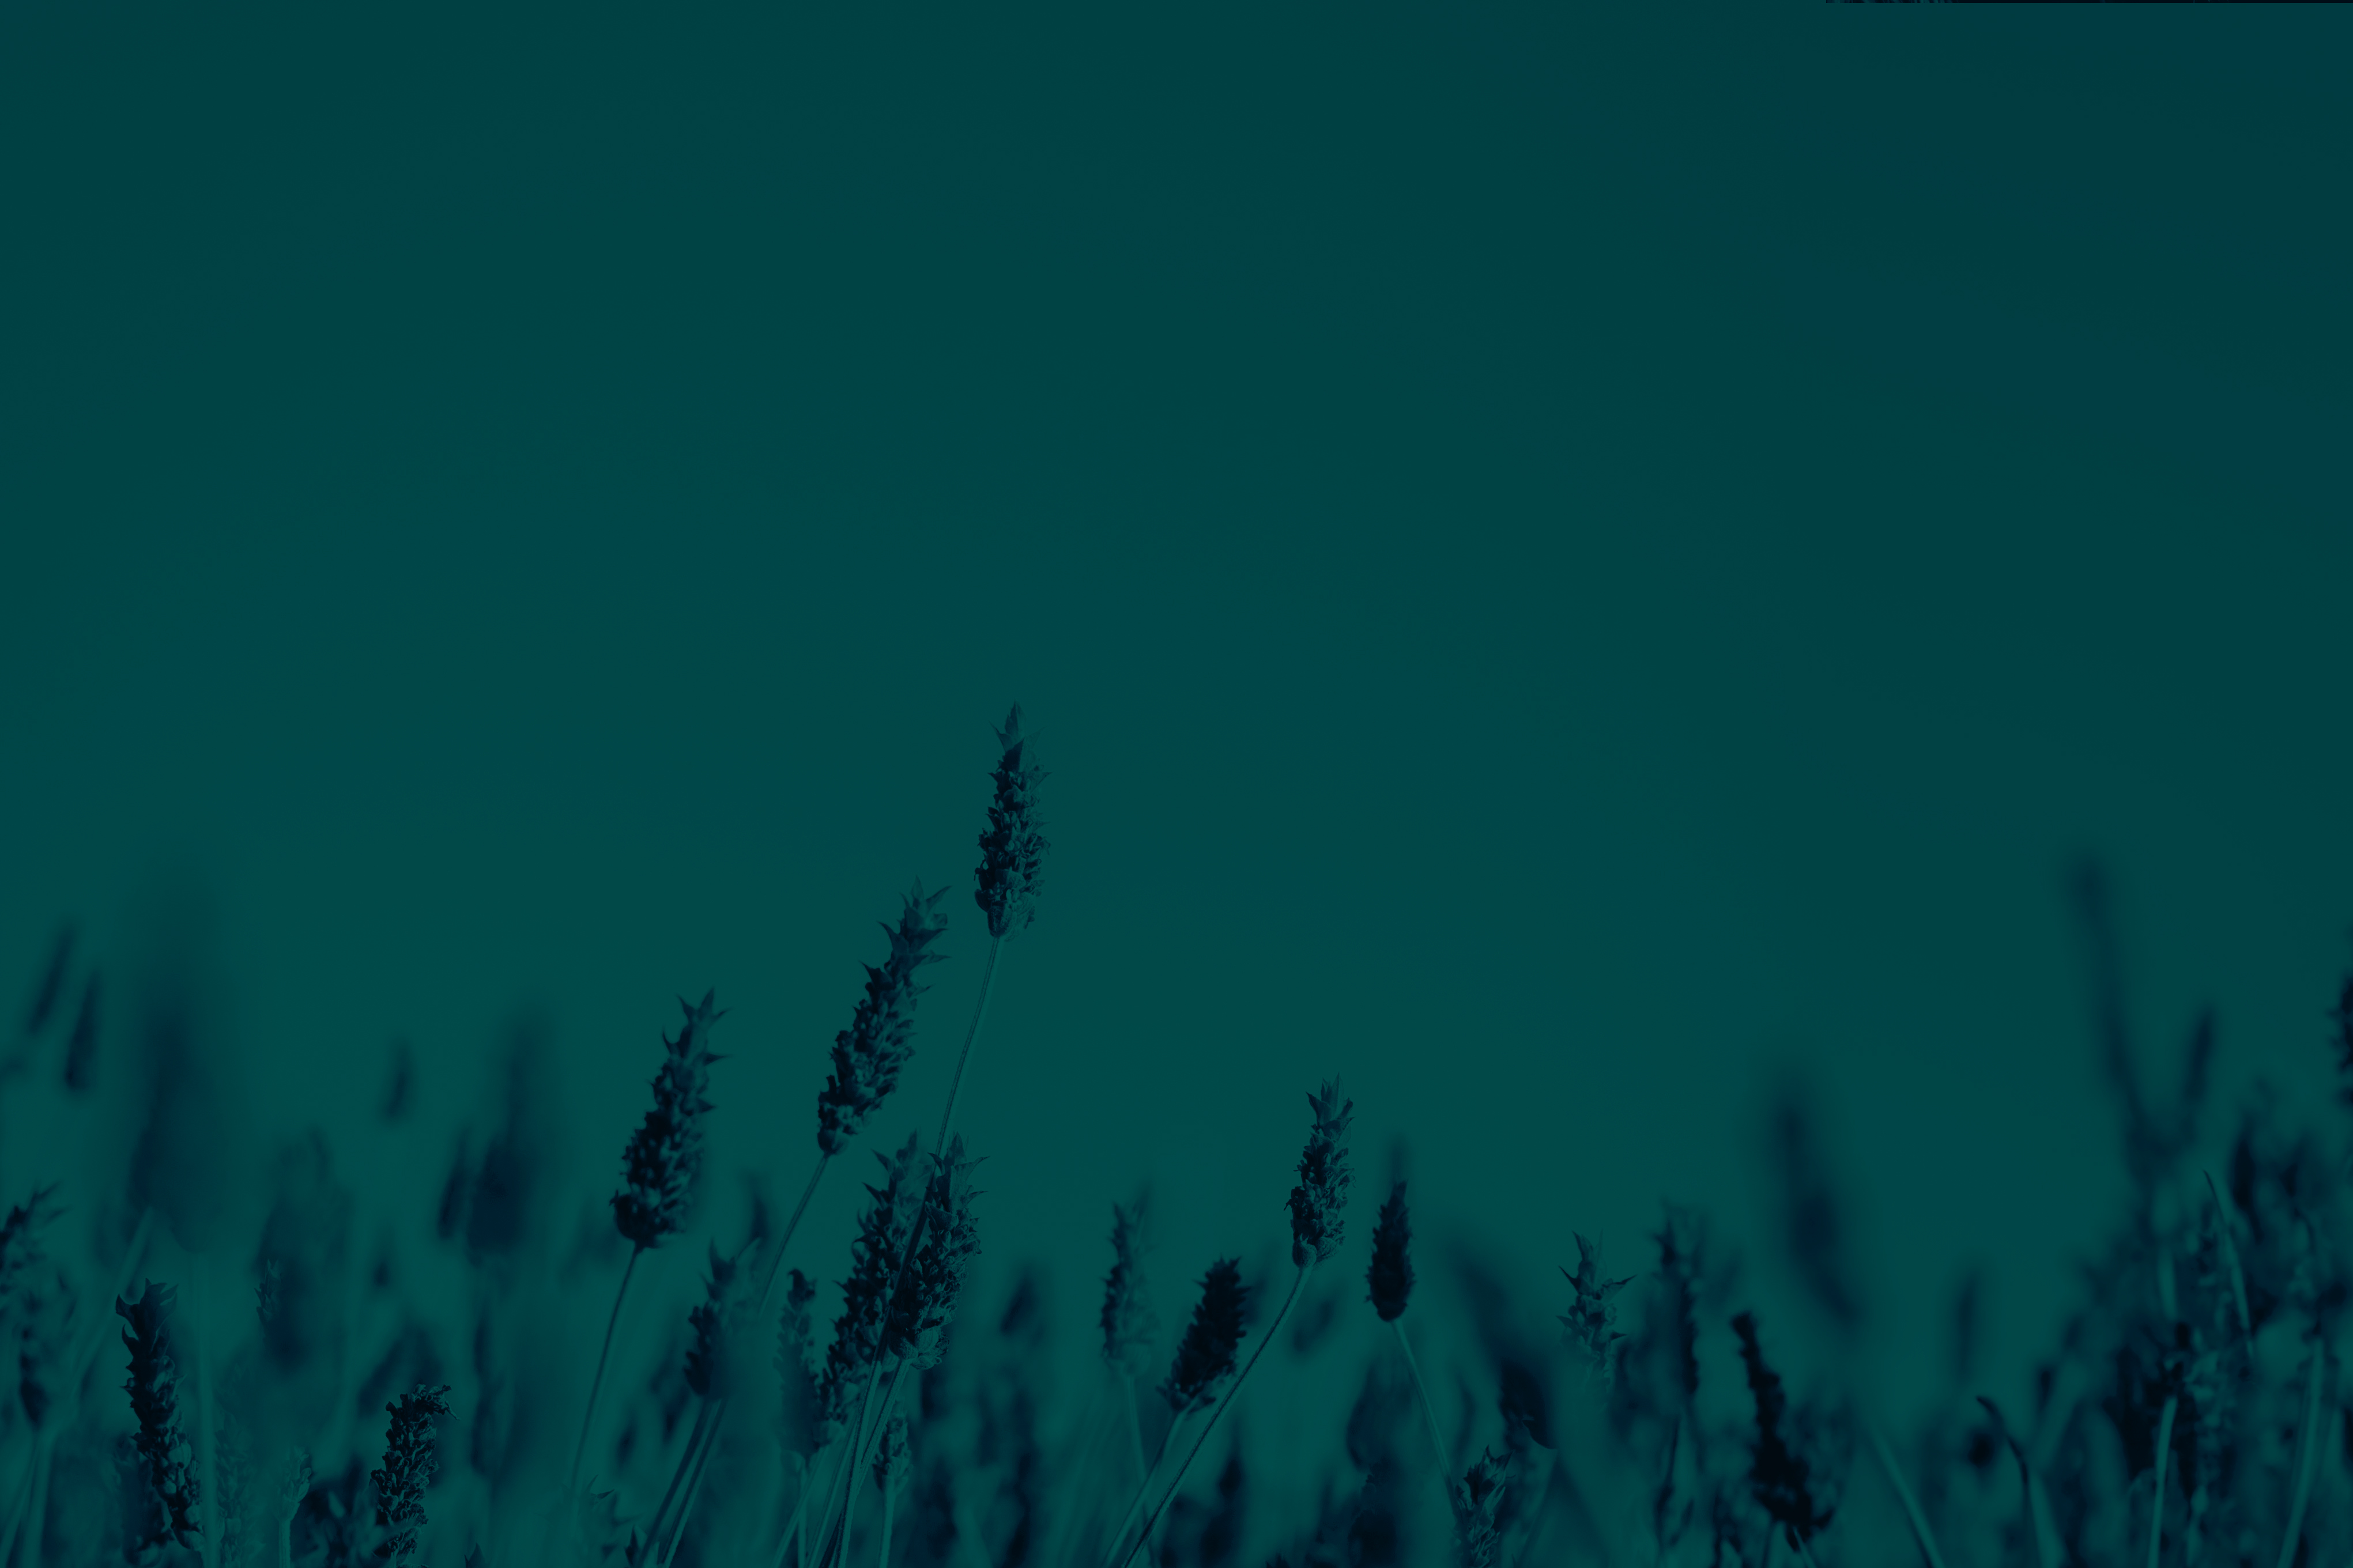 Lavender and sky with a green overlay effect. Russell-Cooke's domestic abuse hub header image.